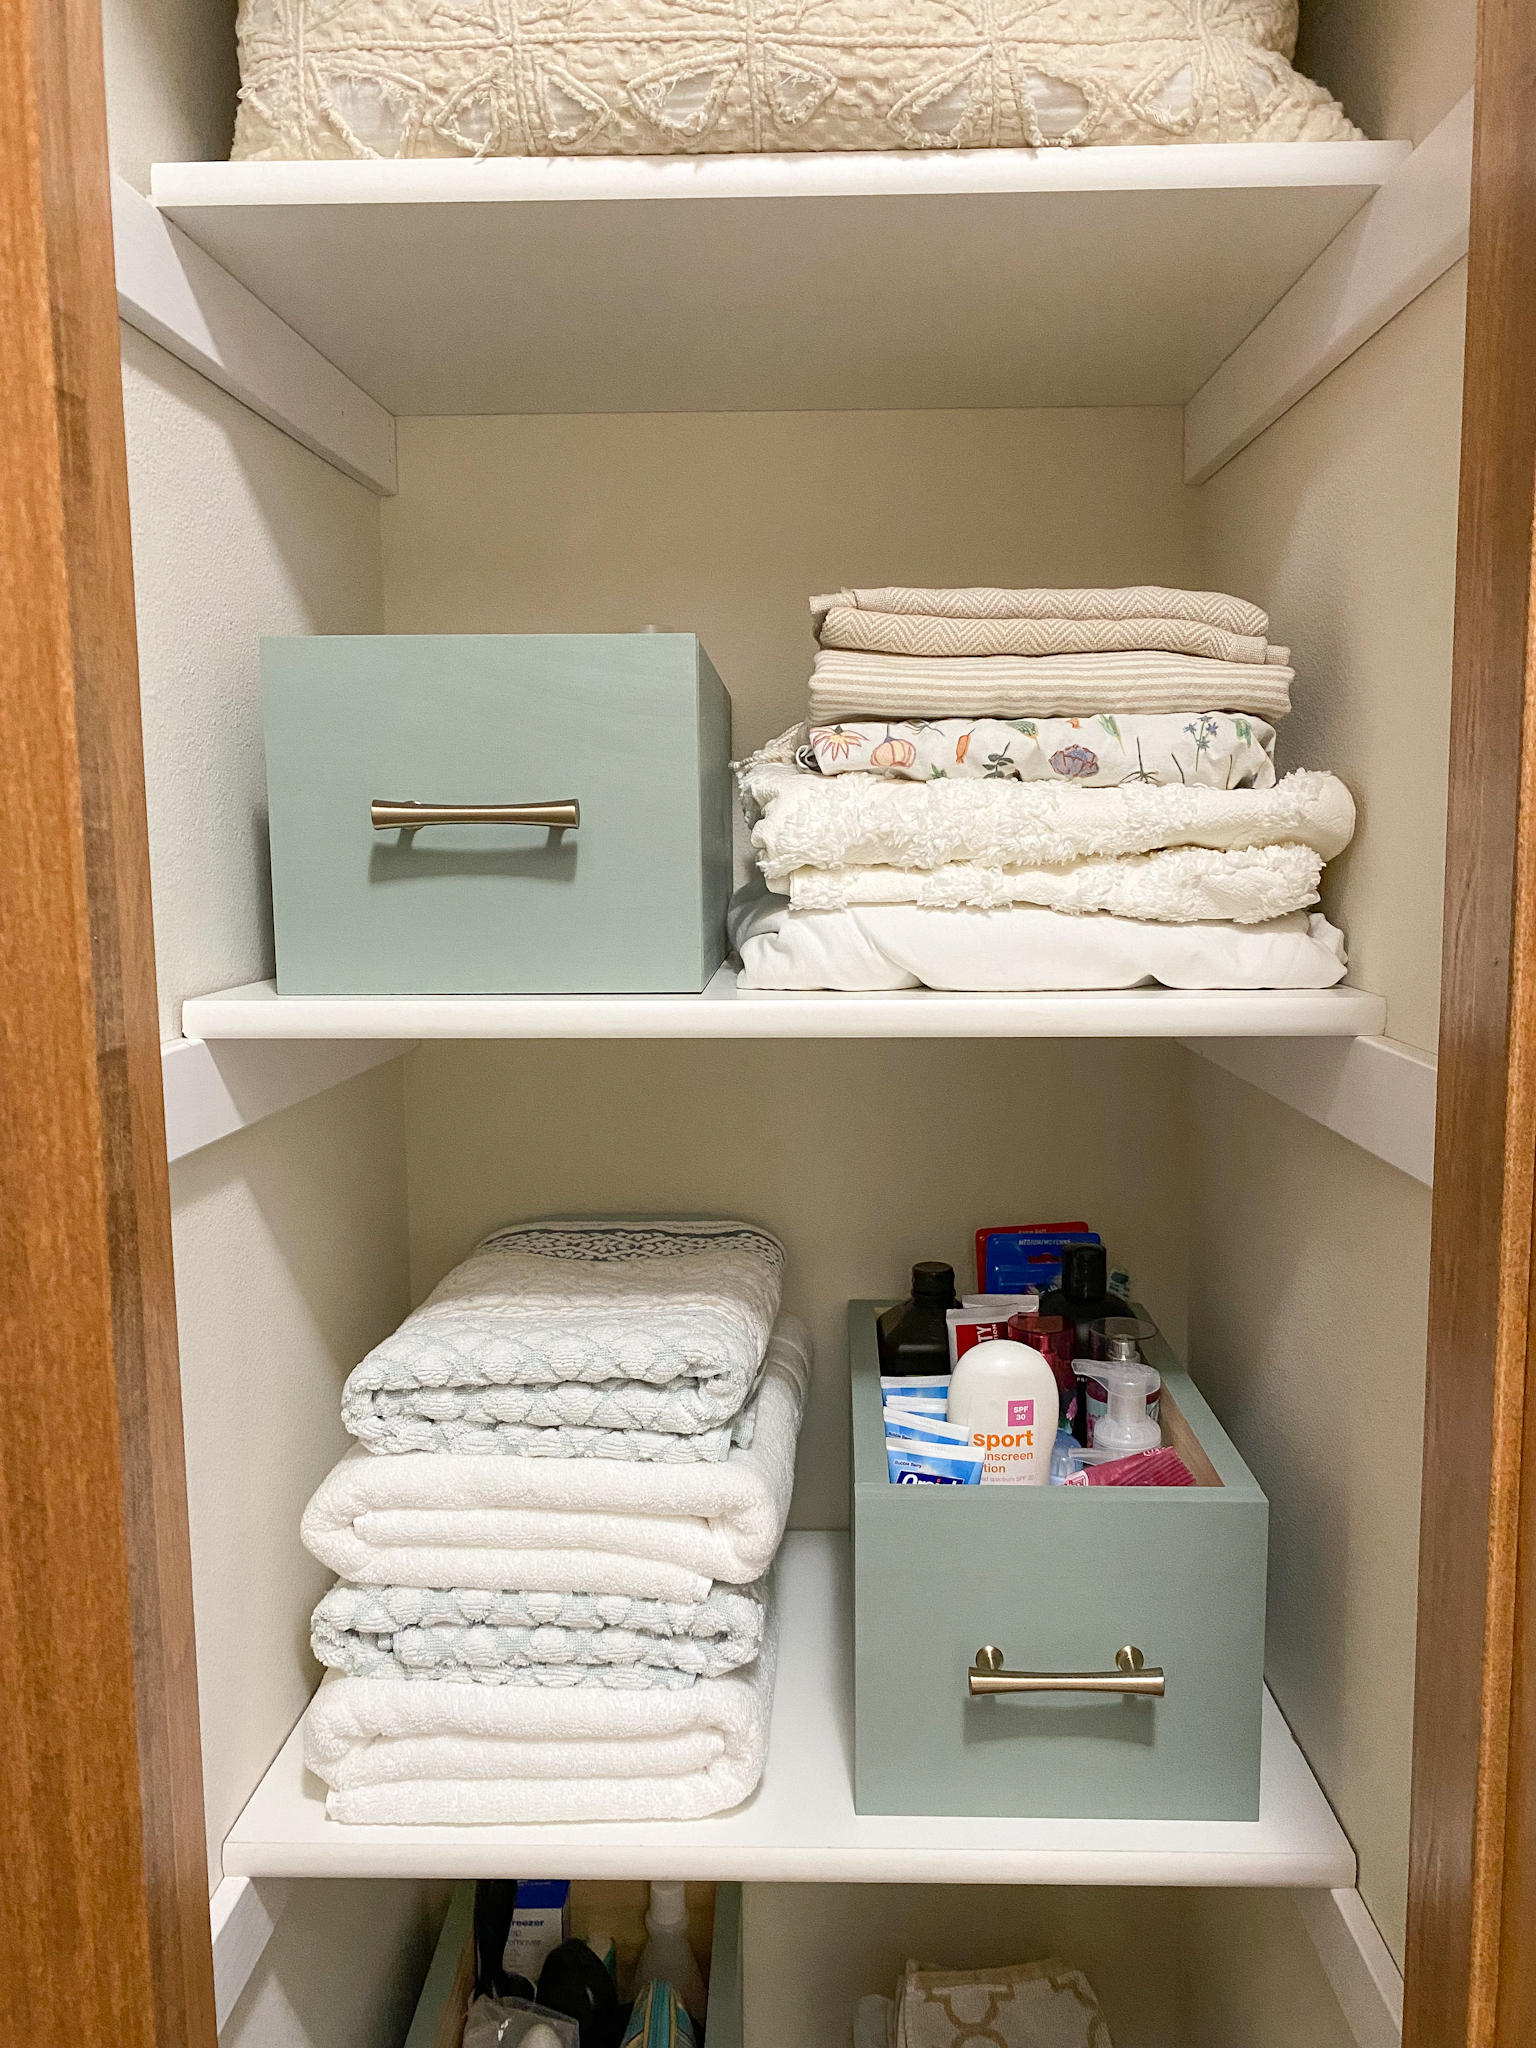 Simply Done: The Most Beautiful Linen Closet - Simply Organized